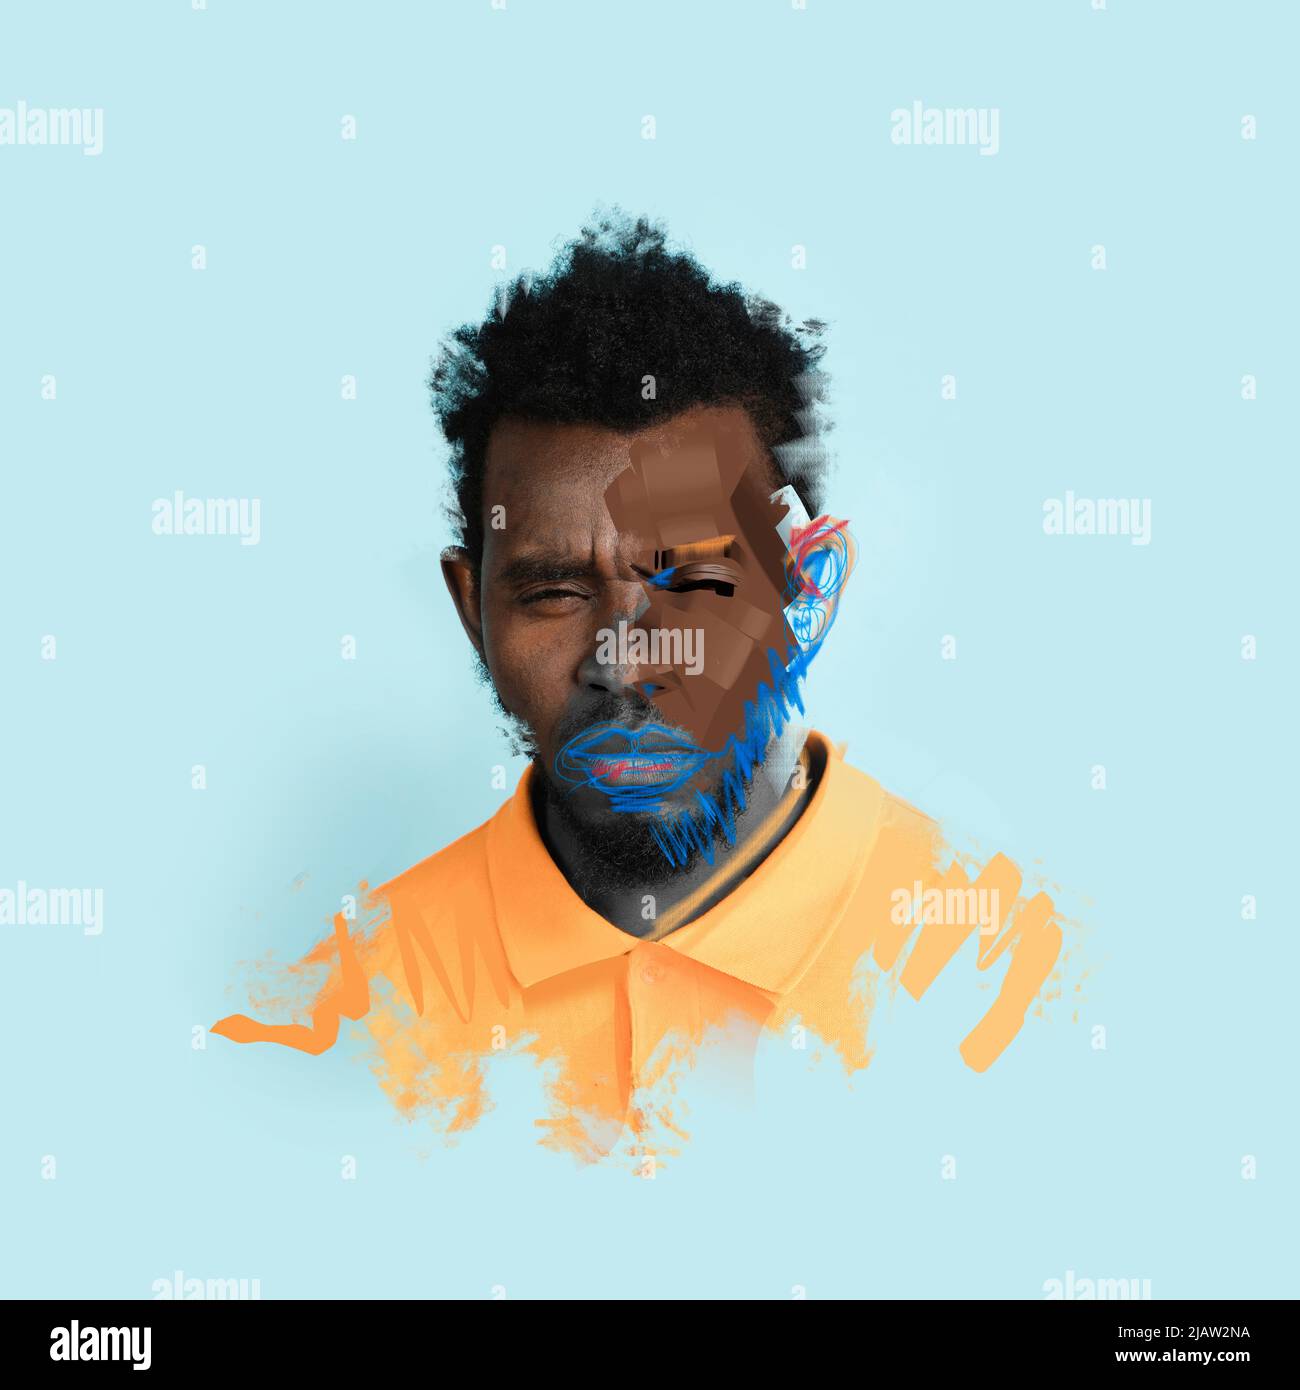 Poster with young serious african man's portrait over blue background. Poster graphics effect. Combination of photo and illustration. Ideas Stock Photo